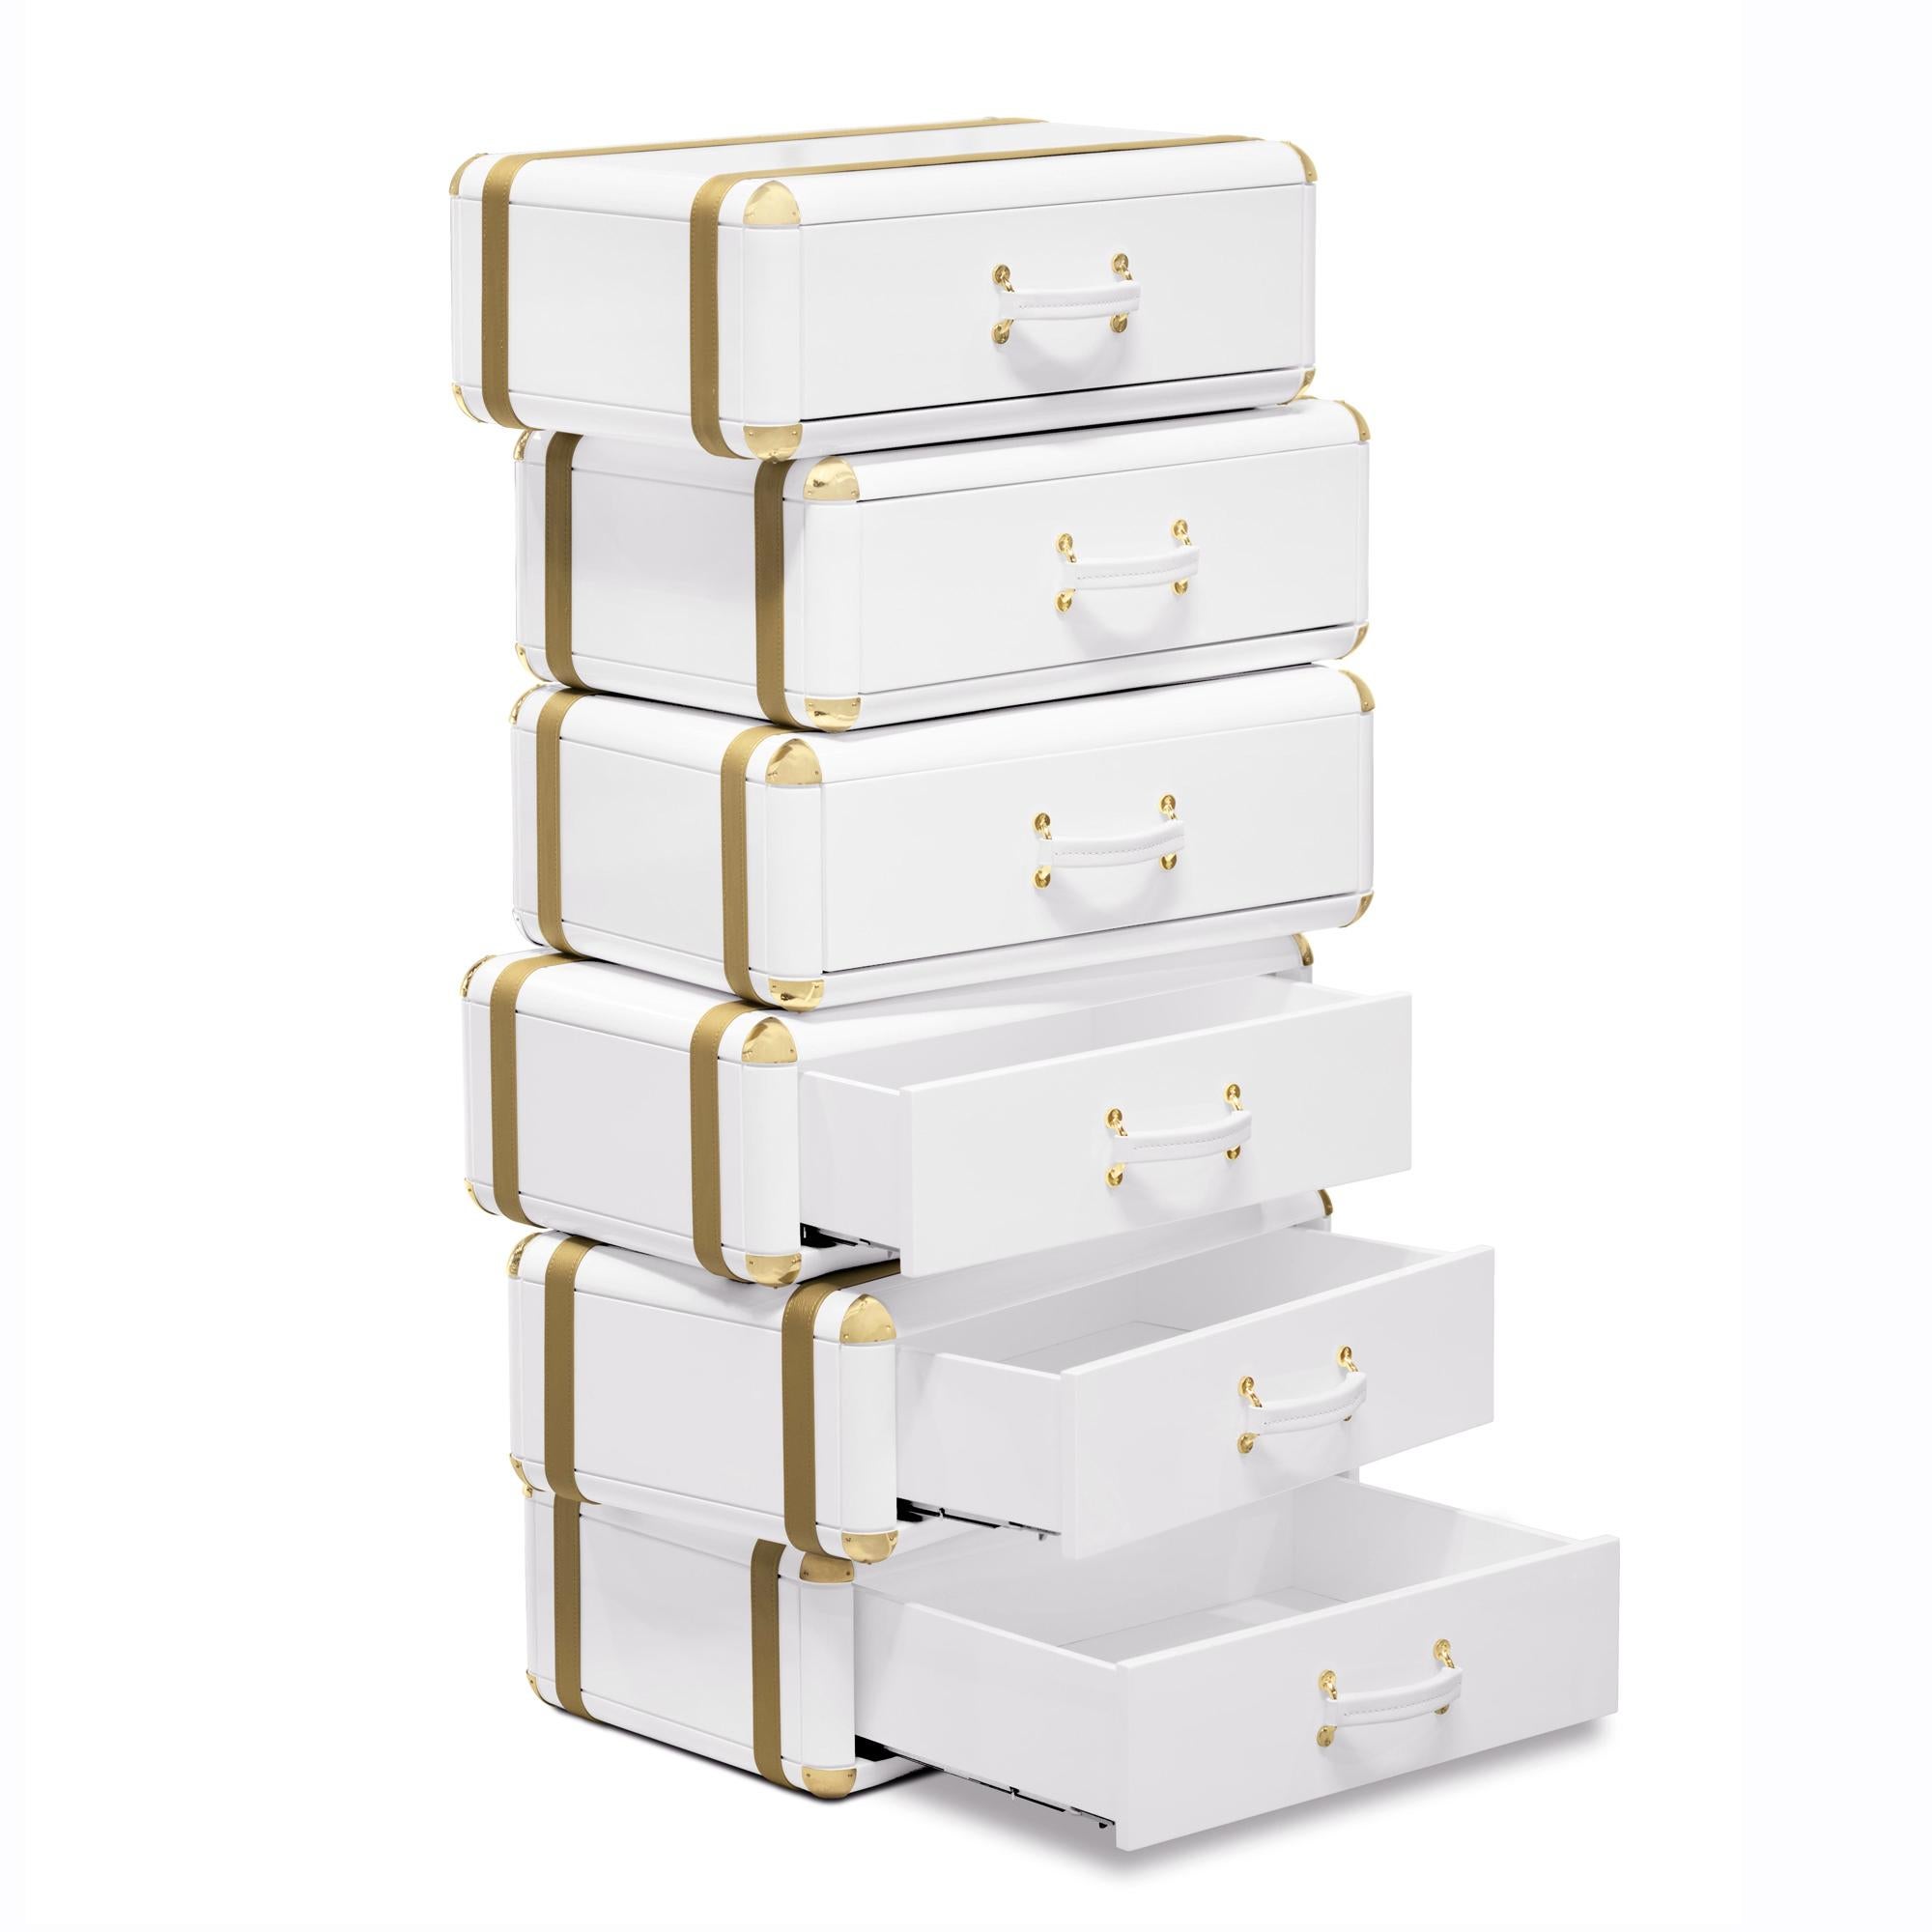 Hand-Crafted White Flight Case Shelf of 6 Drawers in White Lacquered Finish For Sale